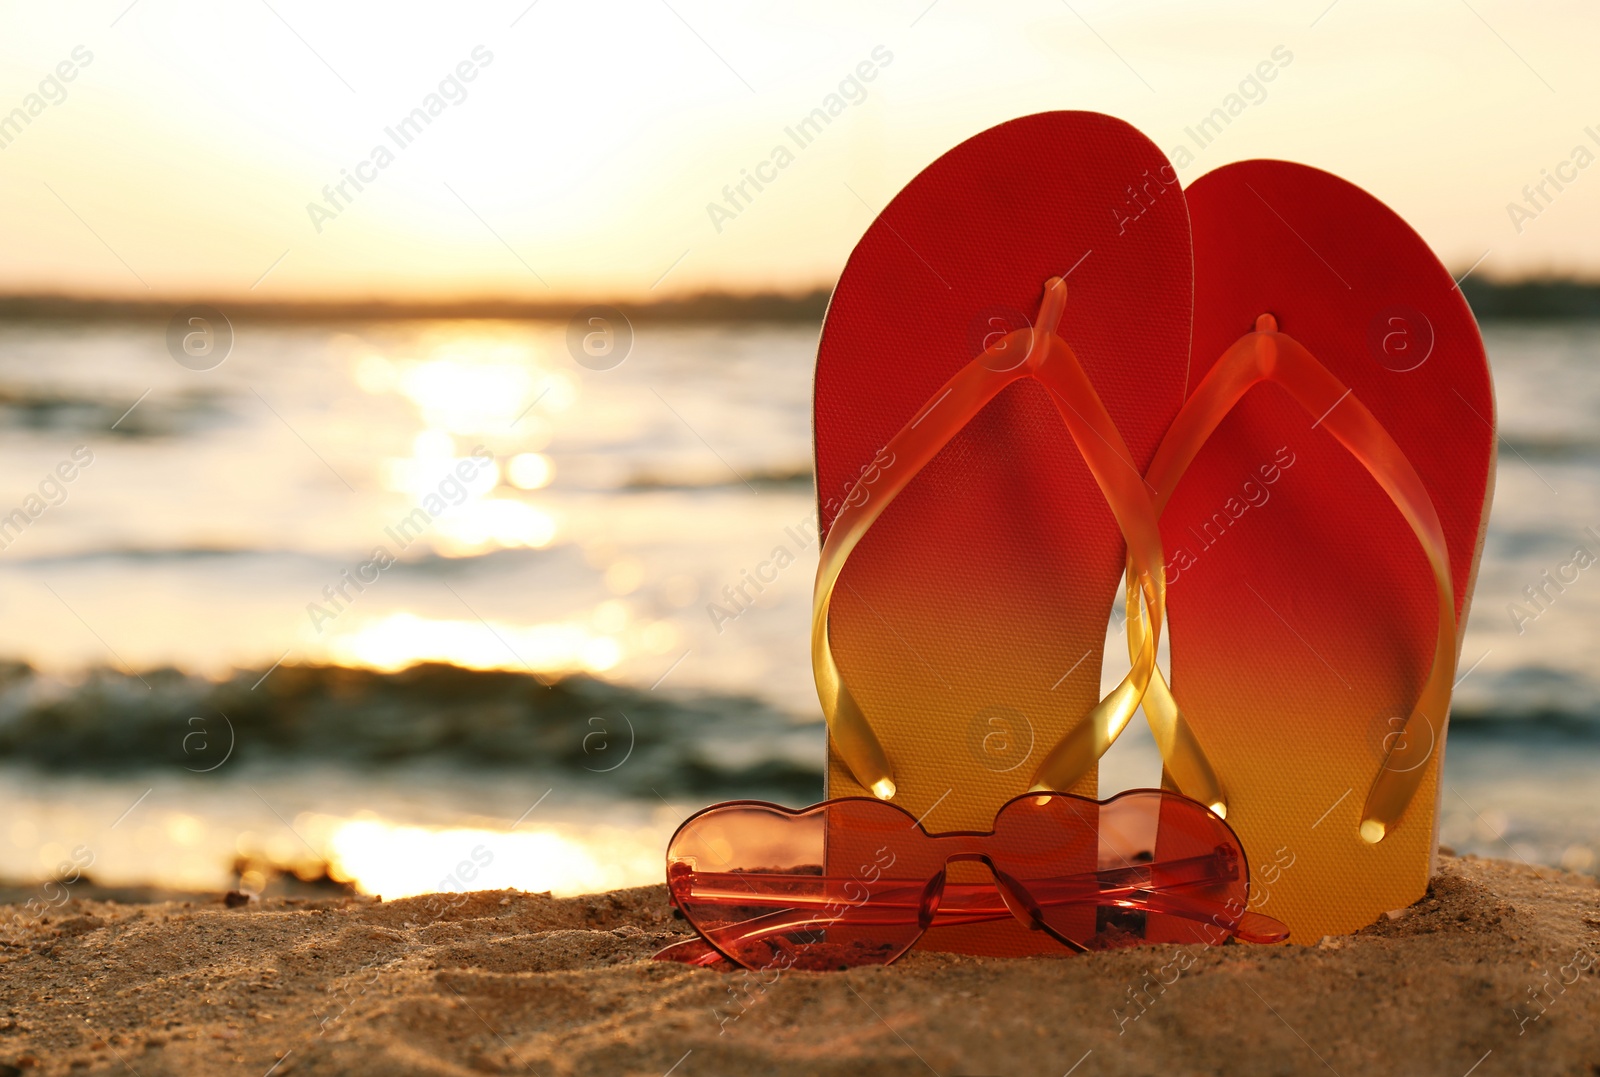 Photo of Stylish flip flops with sunglasses on sand near sea, space for text. Beach accessories